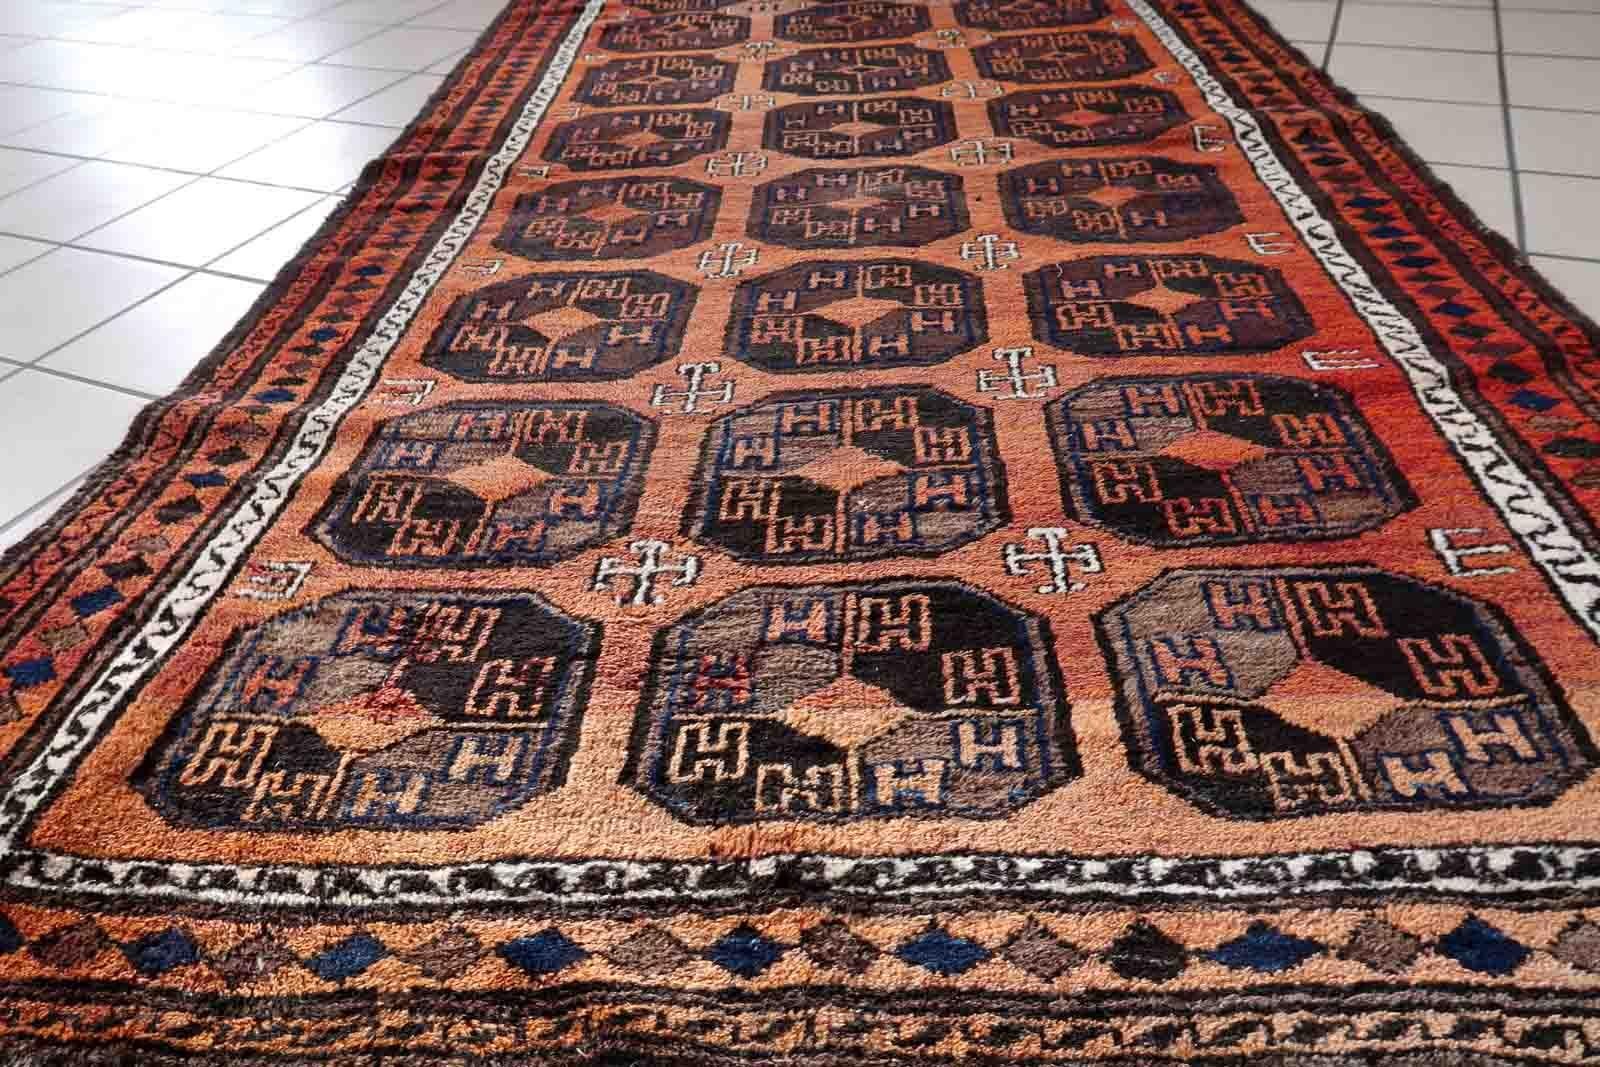 Handmade antique Afghan Baluch rug in repeating pattern. The rug is from the beginning of 20th century in original condition, it has some low pile.

-condition: original, some low pile,

-circa: 1900s,

-size: 3.7' x 6.6' (114cm x